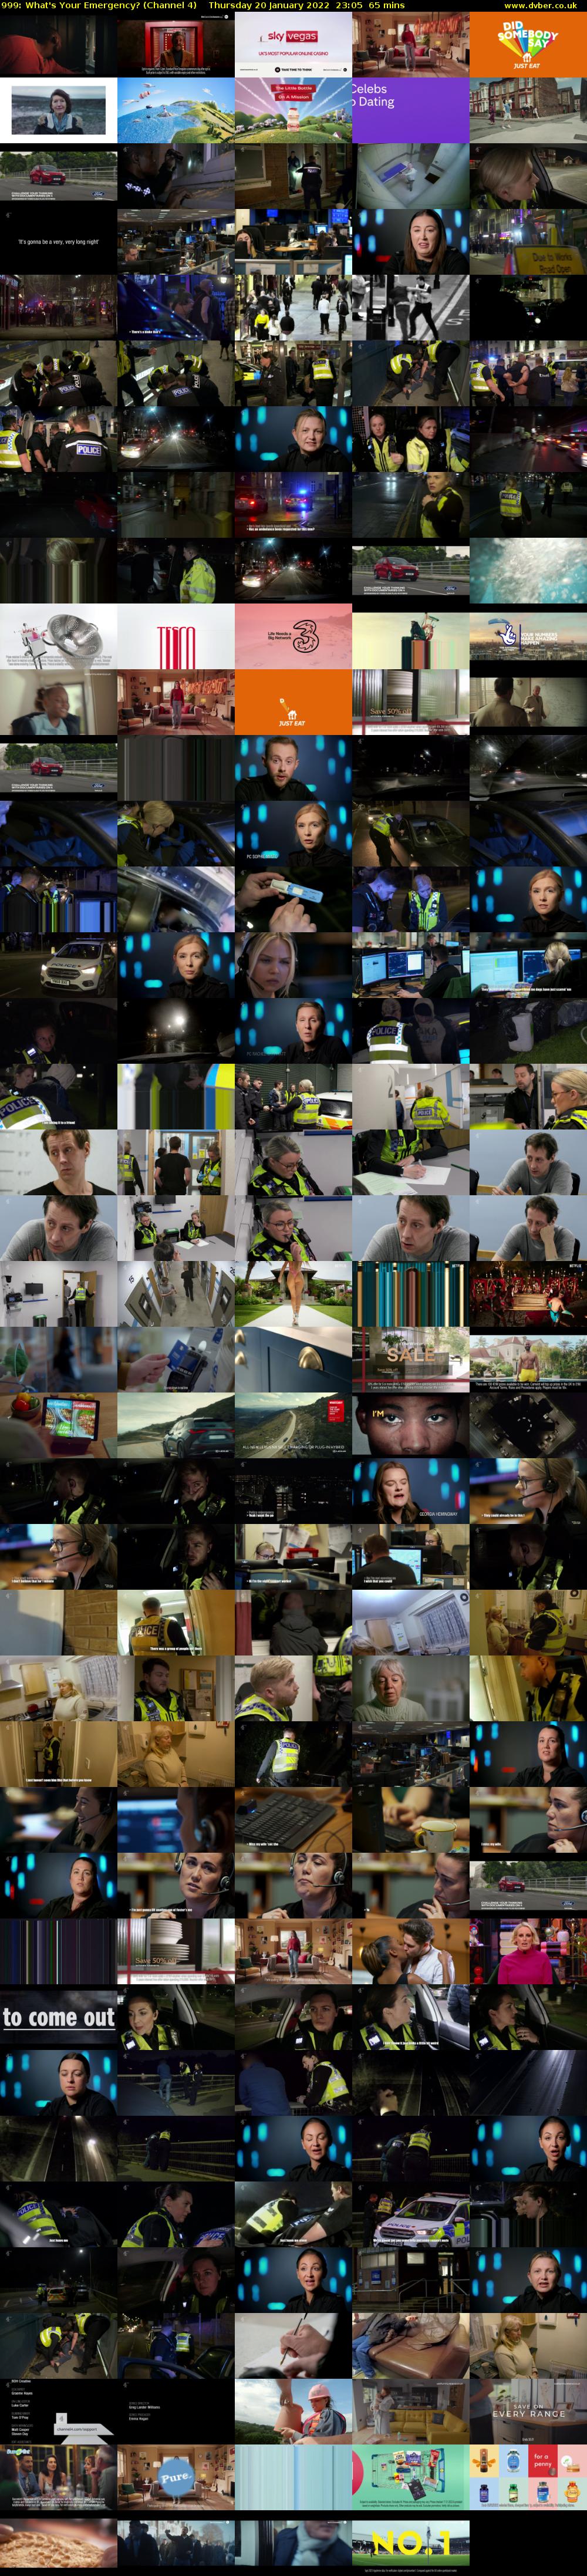 999: What's Your Emergency? (Channel 4) Thursday 20 January 2022 23:05 - 00:10